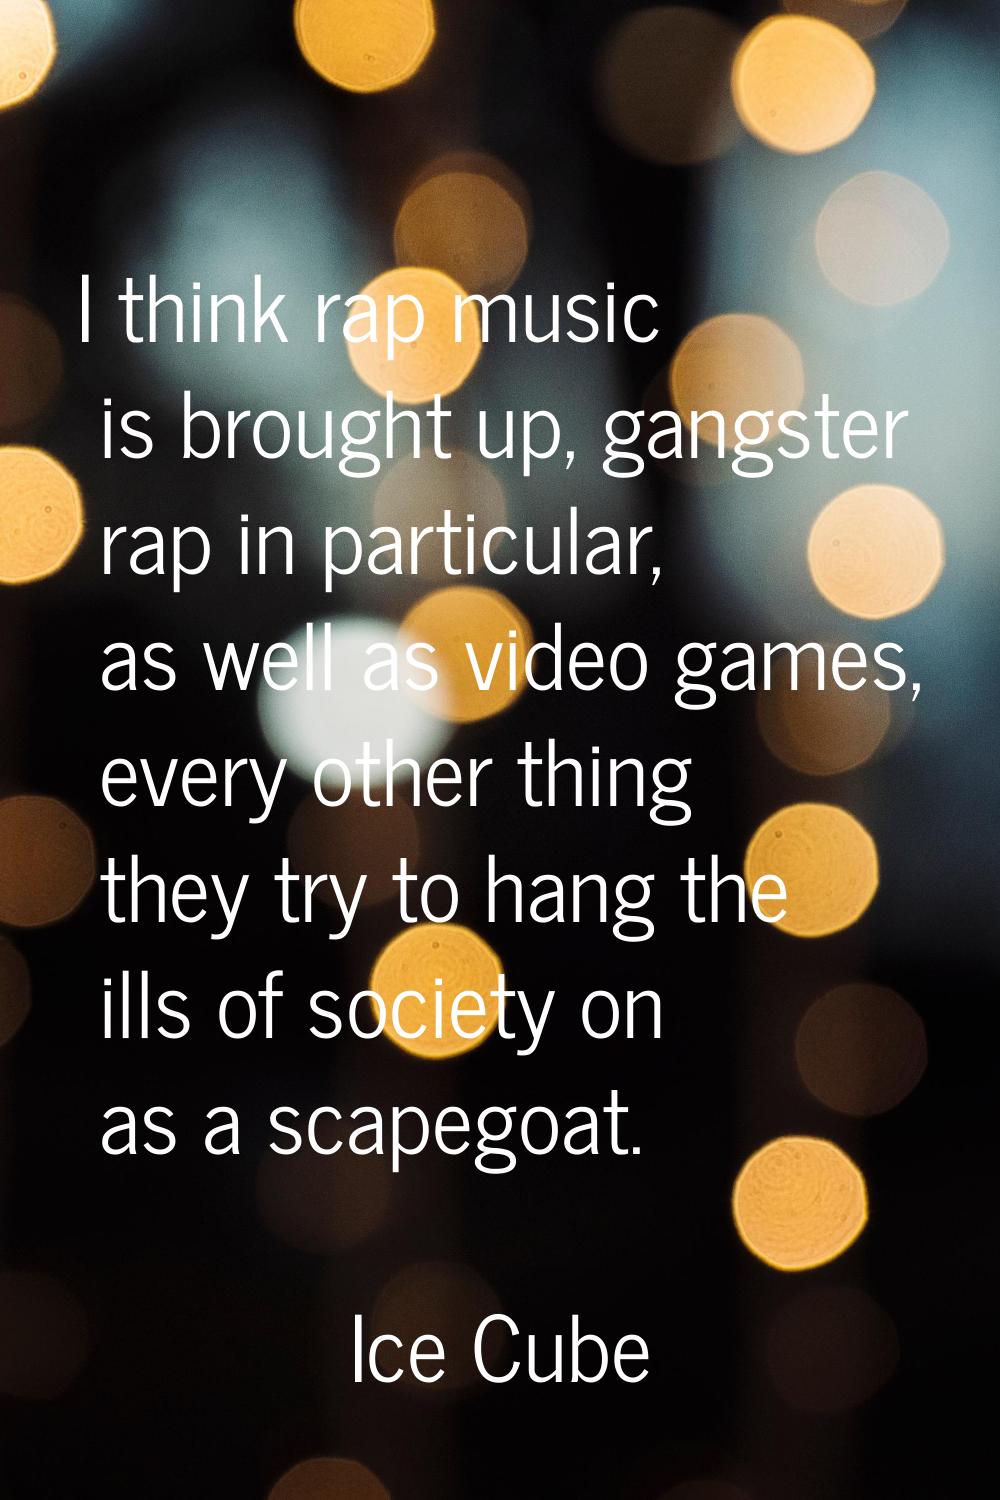 I think rap music is brought up, gangster rap in particular, as well as video games, every other th